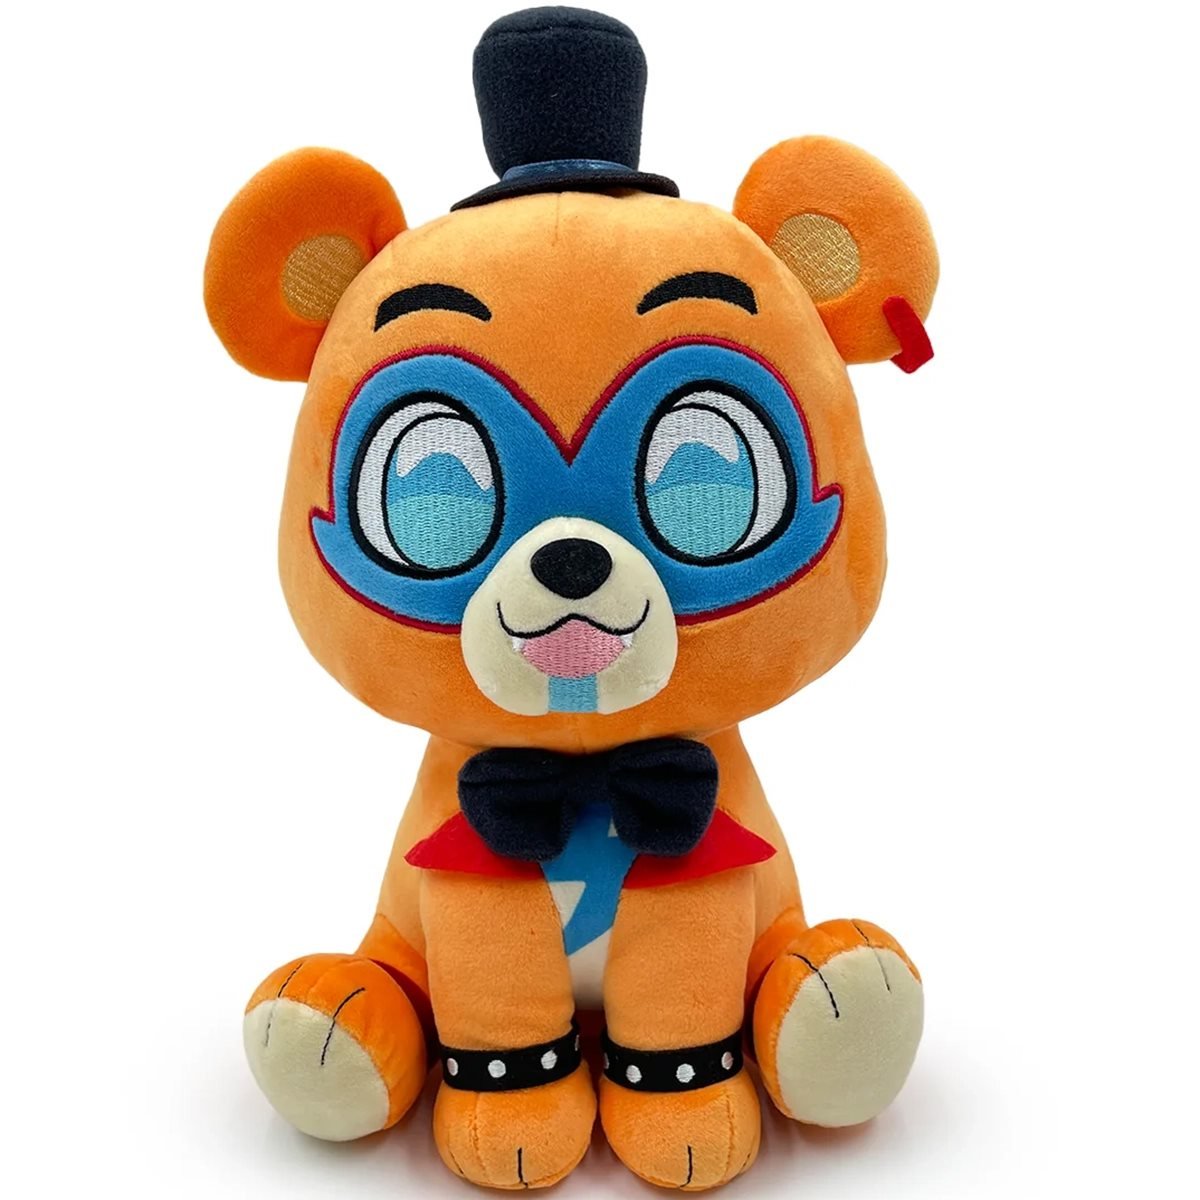 Five Nights at Freddys Plush Toys & Stuffed Animals - Entertainment Earth